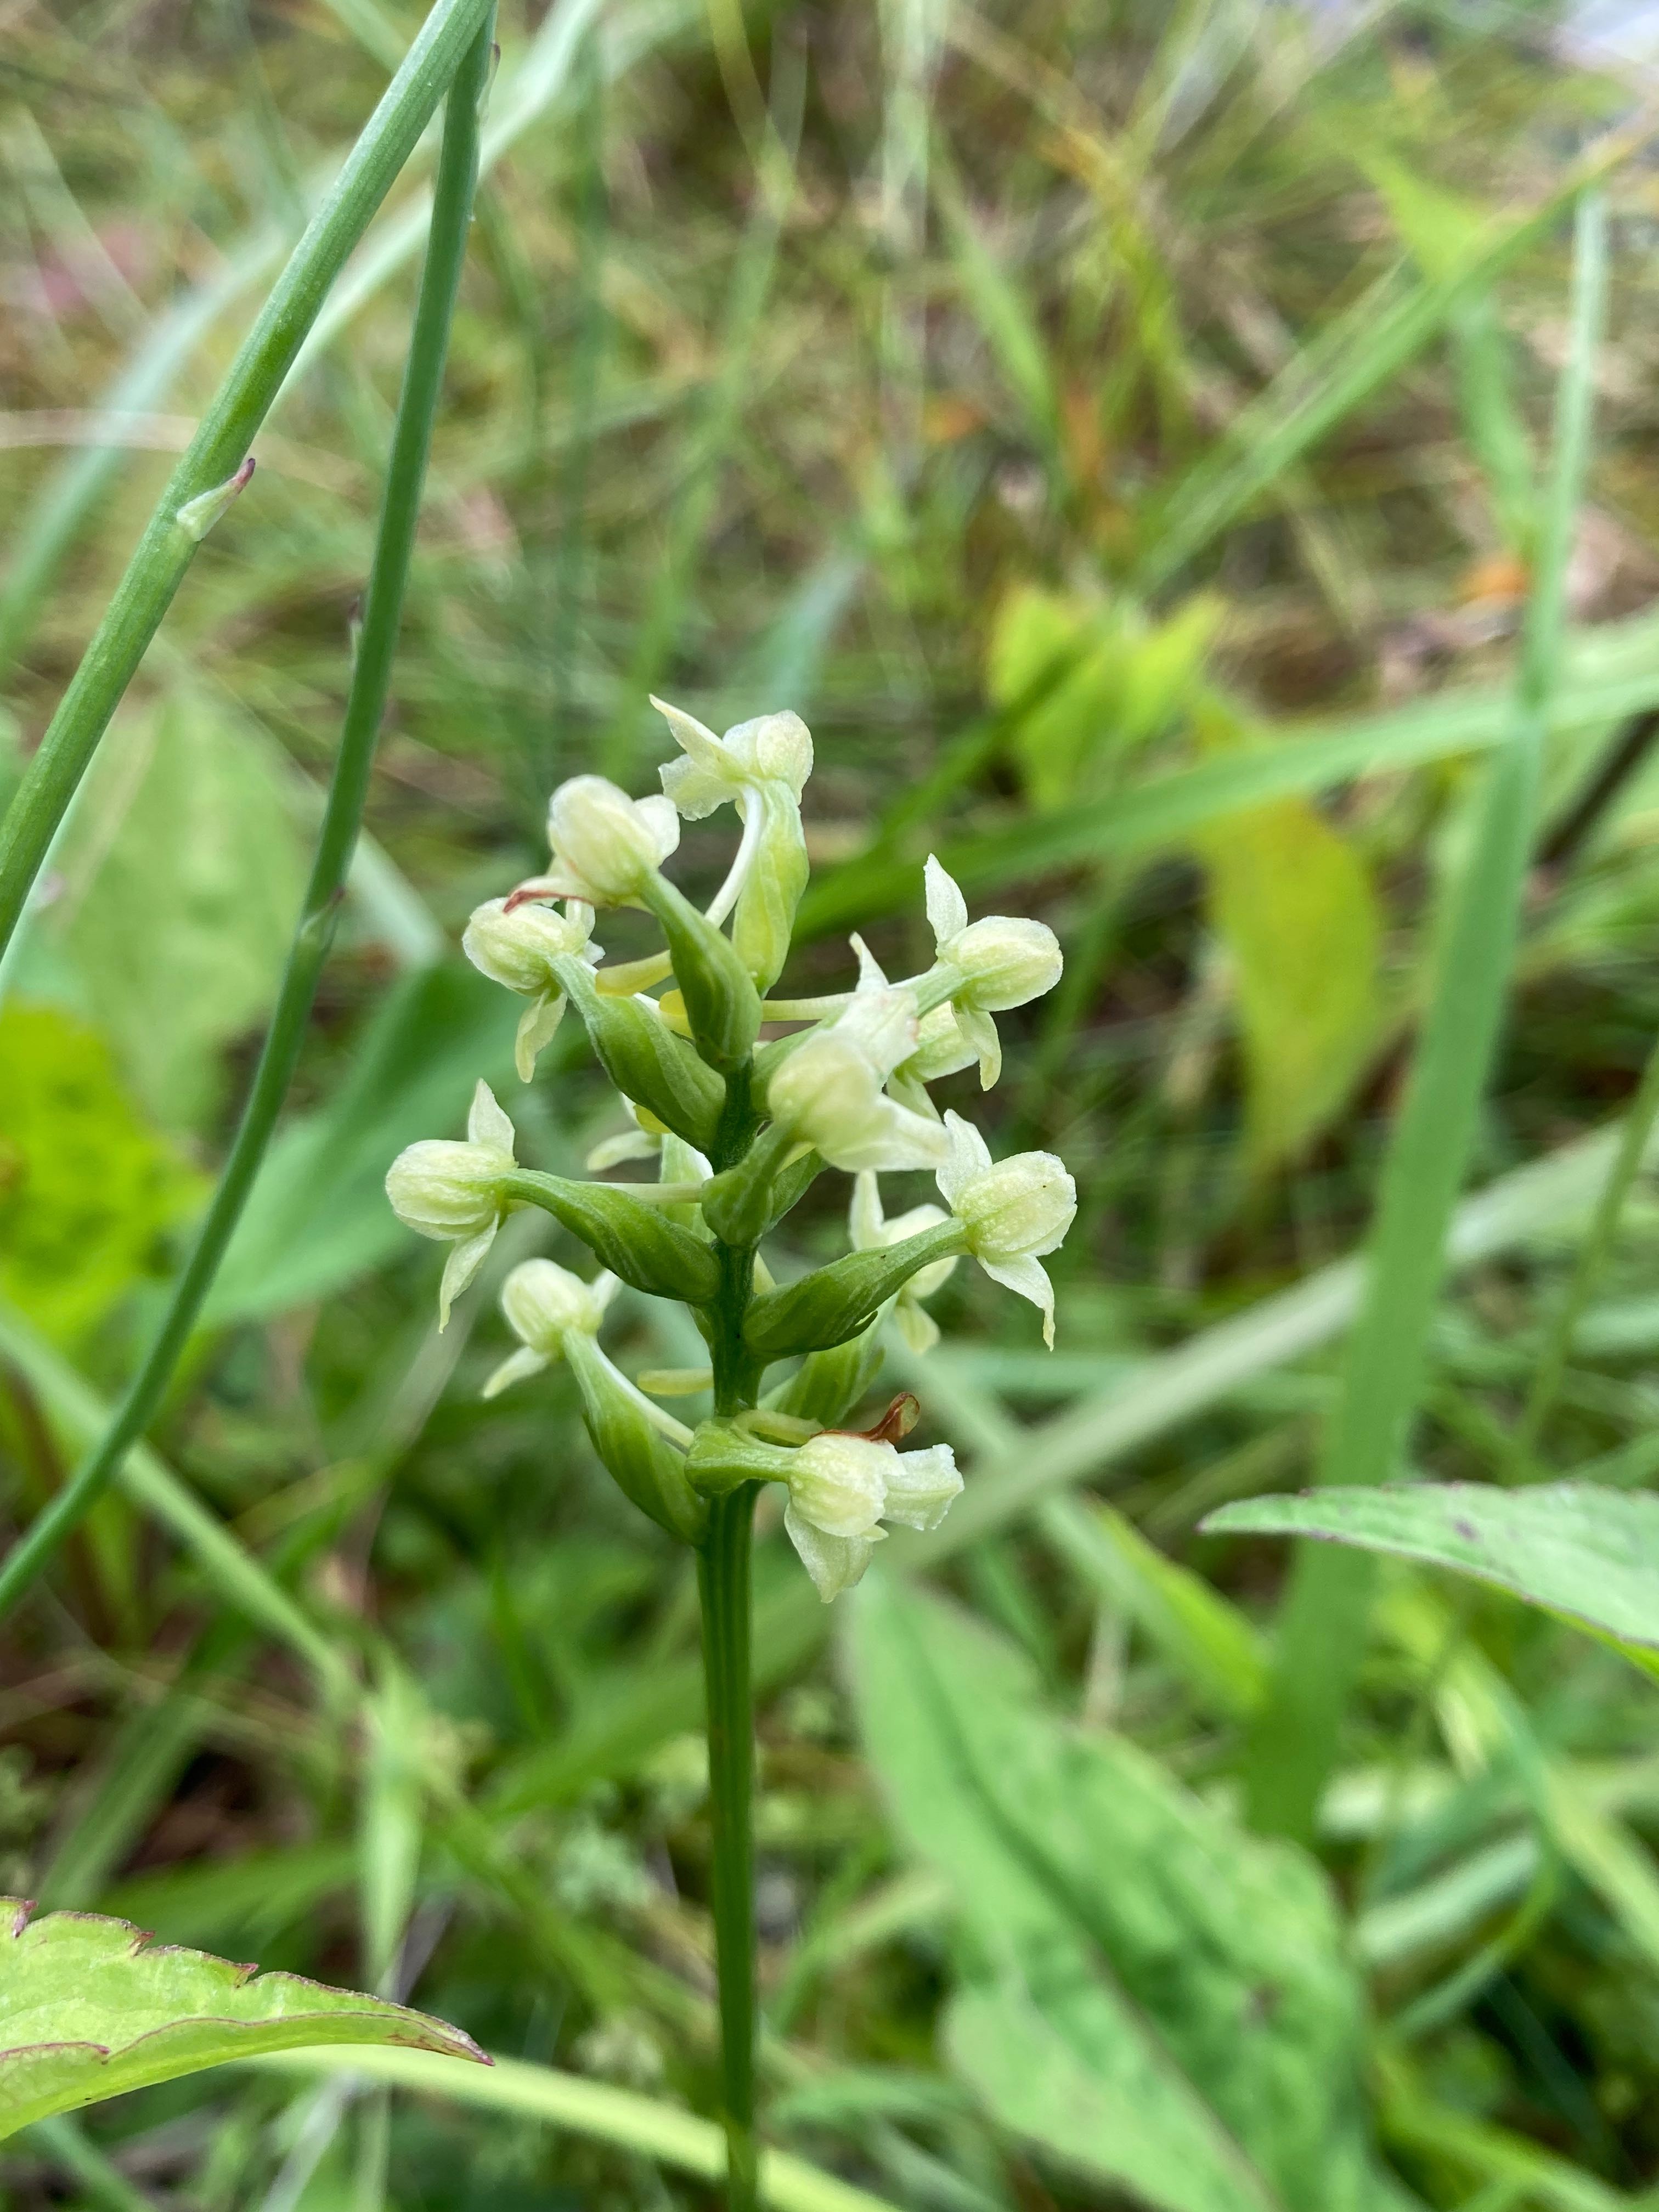 The Scientific Name is Platanthera clavellata [= Habenaria clavellata]. You will likely hear them called Small Green Wood Orchid, Small Woodland Orchid, Little Club-spur Bog Orchid. This picture shows the Flowers can also be whitish in color. of Platanthera clavellata [= Habenaria clavellata]